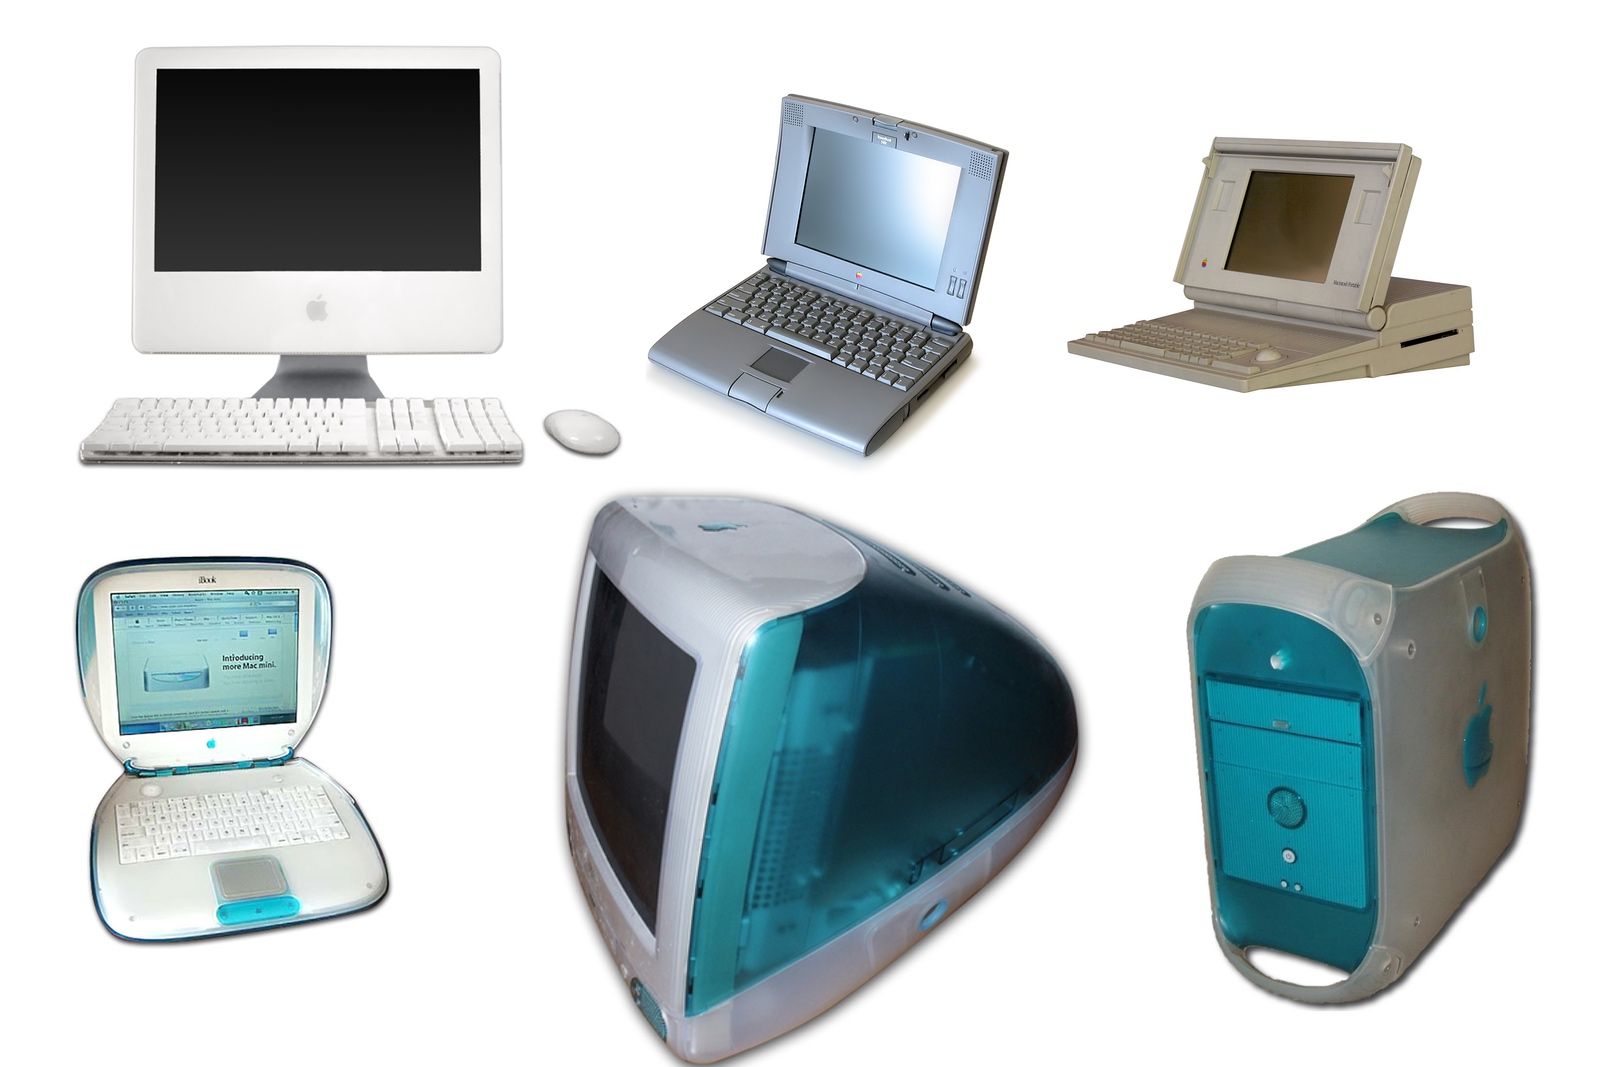 The History of Apple Computers